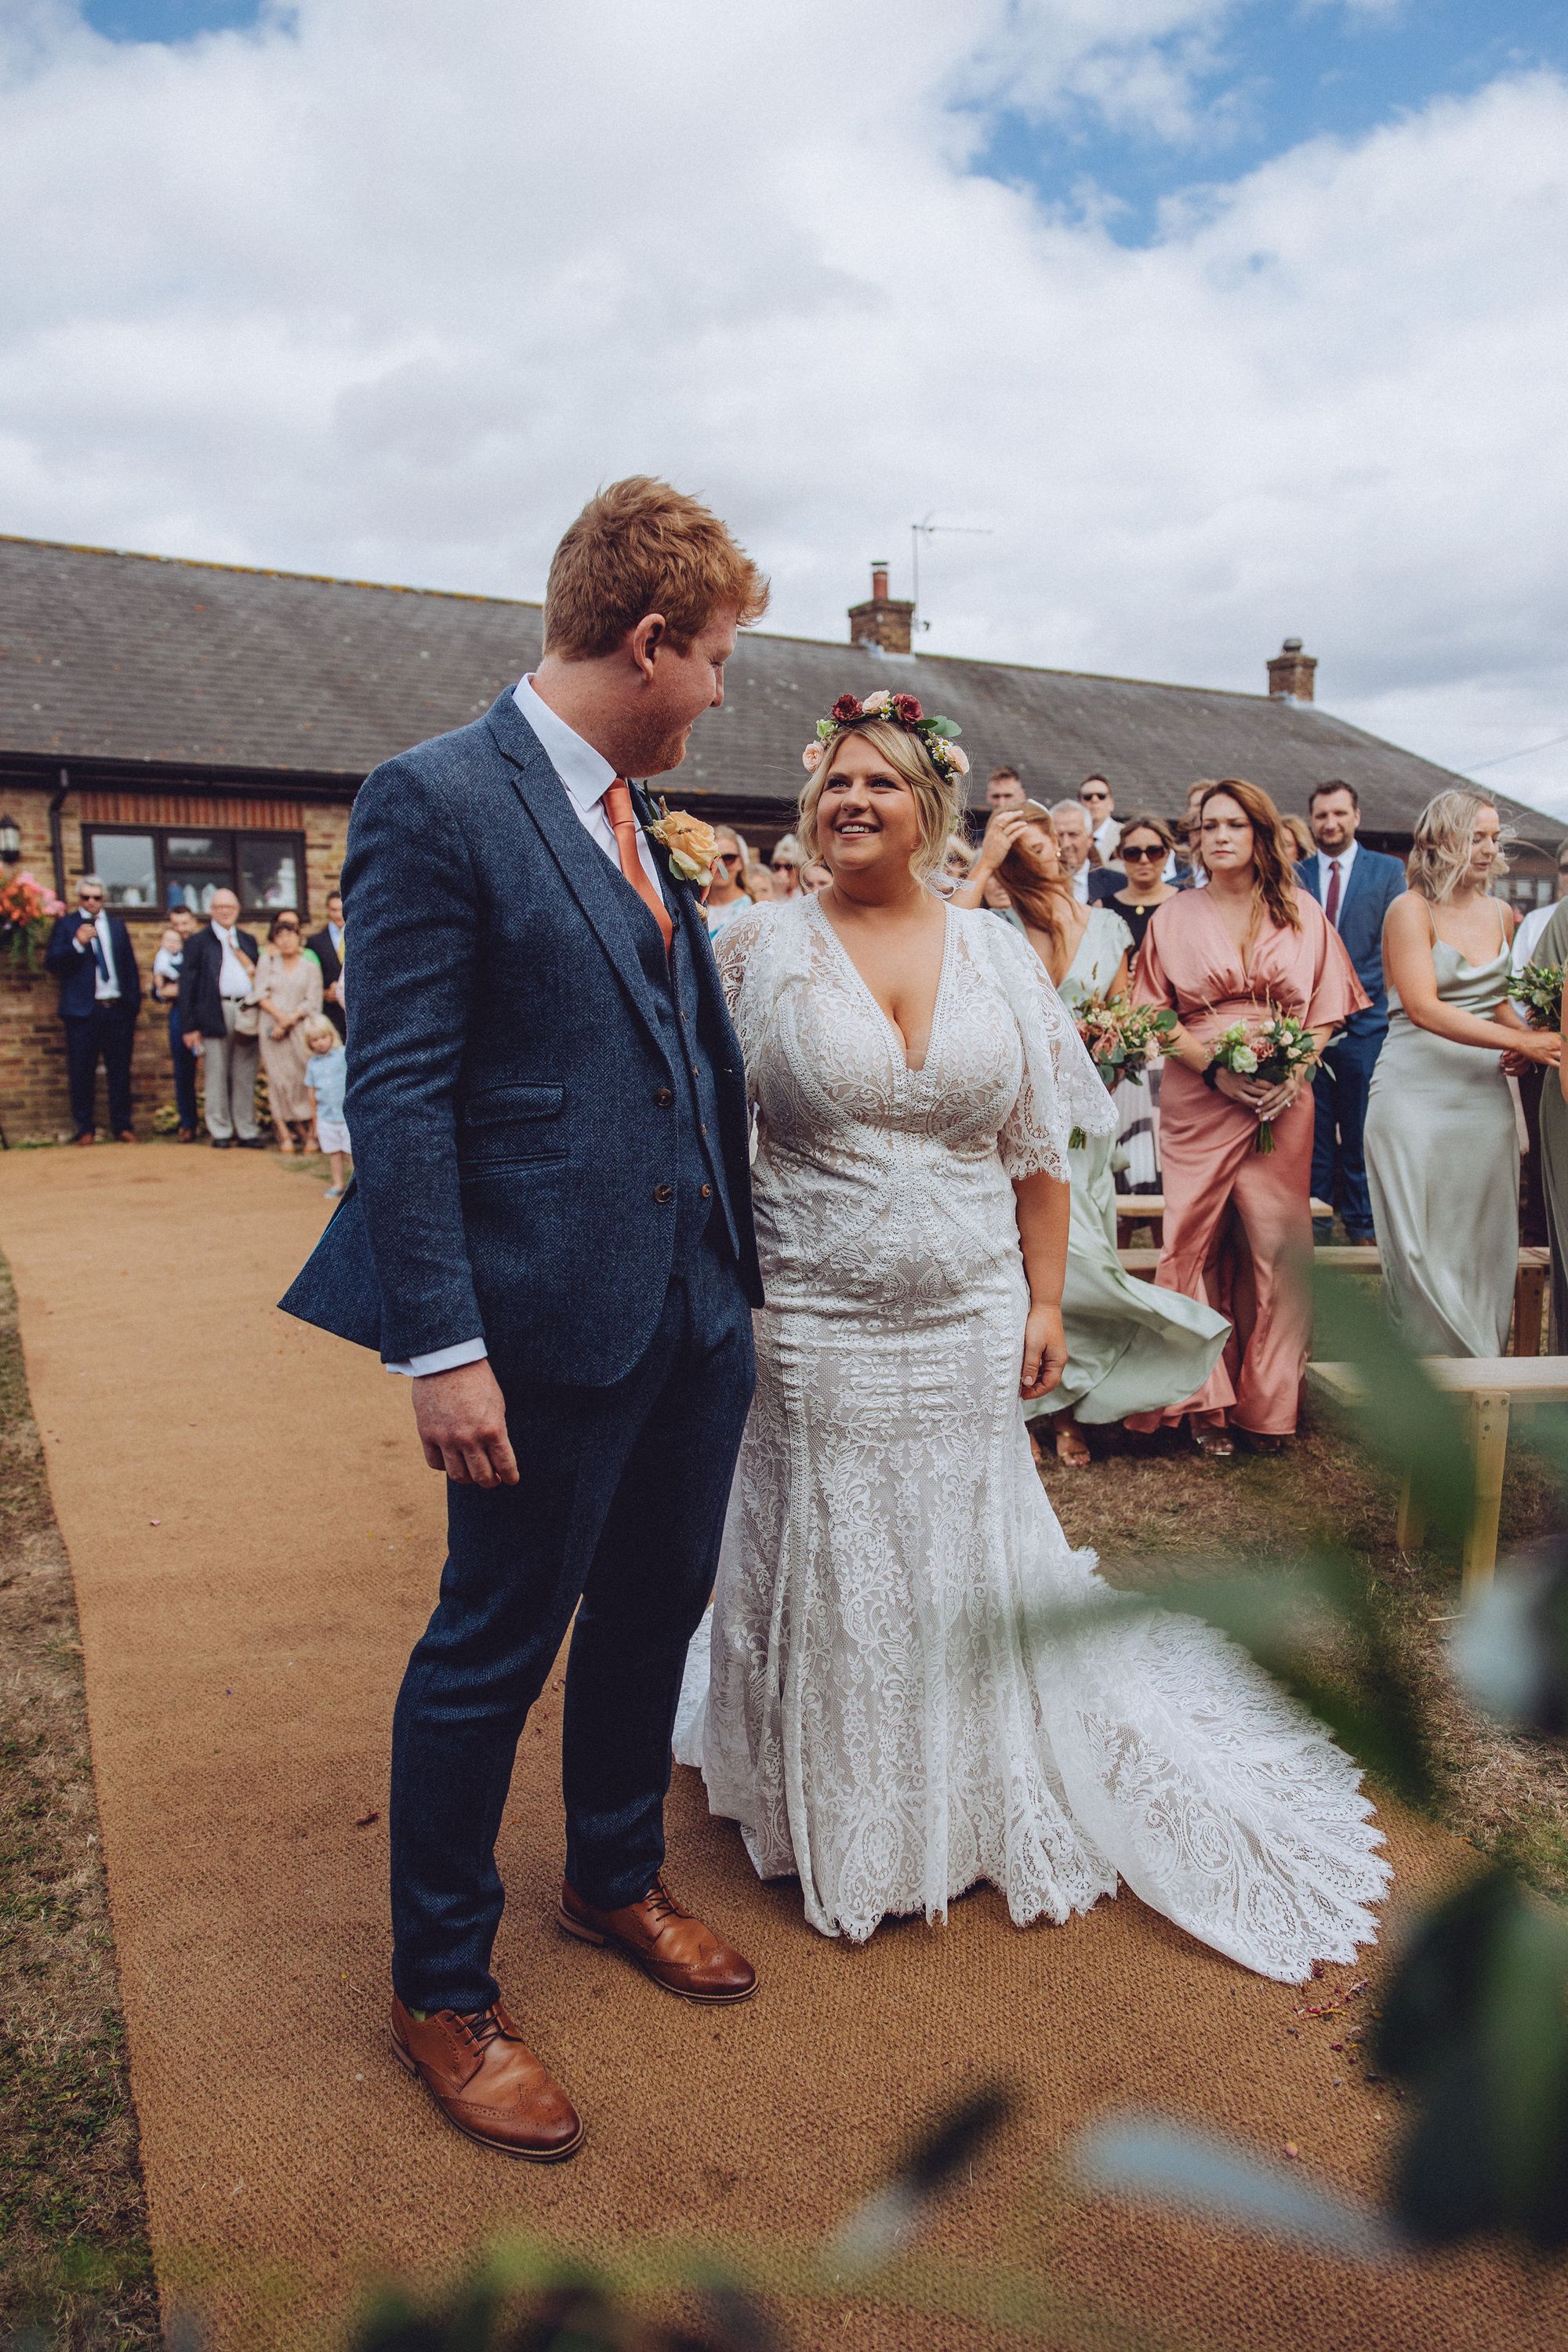 Dan and Nor meet each other at the top of the aisle at the beginning of their celebrant led wedding ceremony in the farm gardens. Photo thanks to Fordtography.